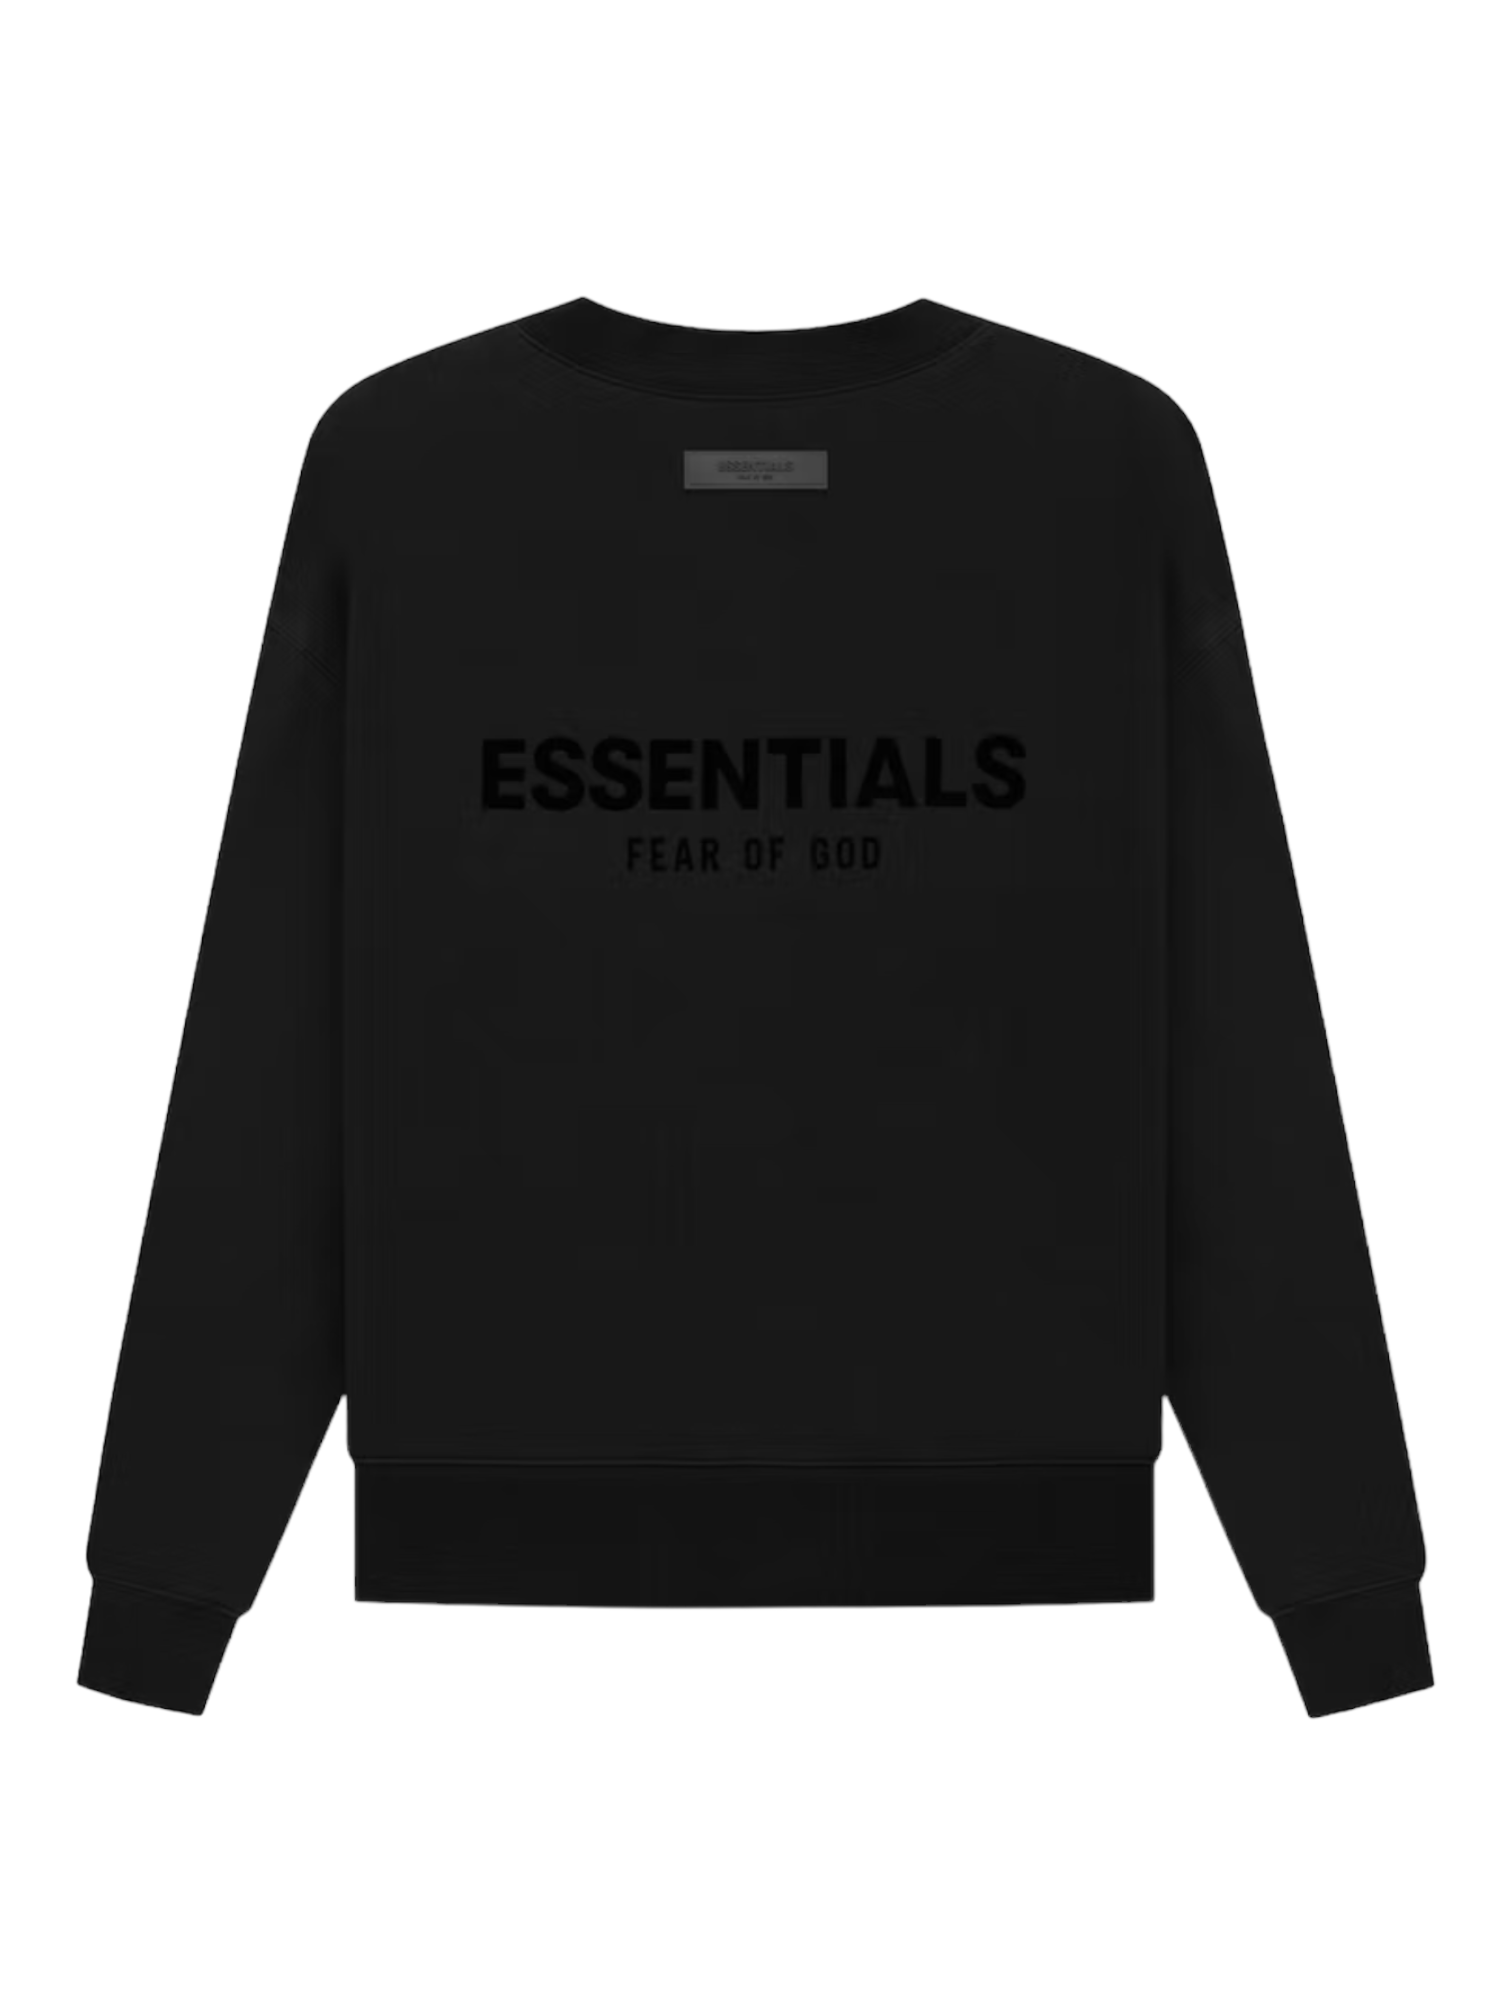 Essentials Fear of God Stretch Limo Black Crewneck Sweatshirt SS22 - Genuine Design Luxury Consignment Calgary, Canada New & Pre-Owned Authentic Clothing, Shoes, Accessories.